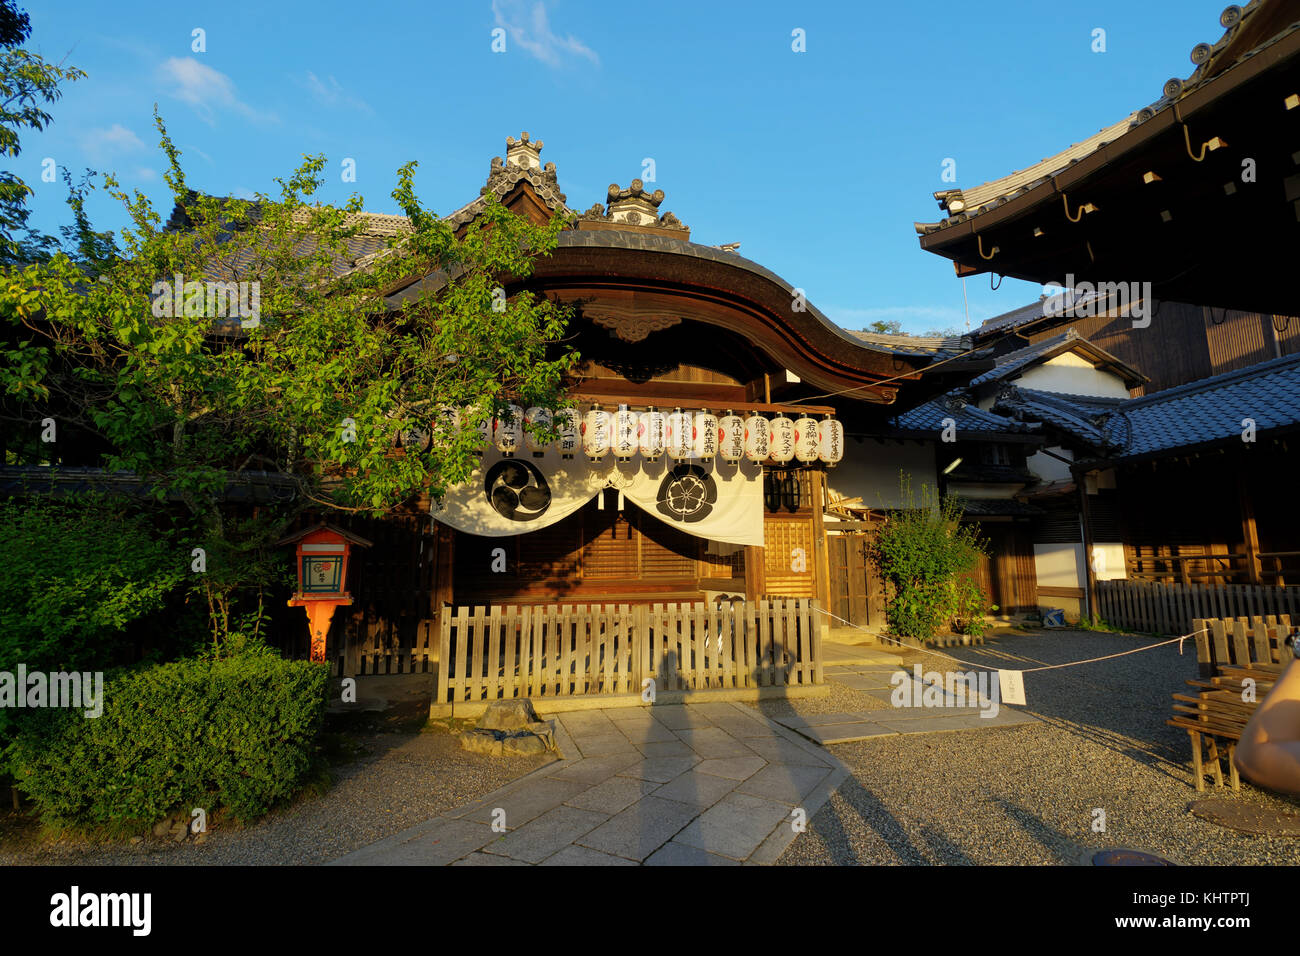 Temple in evening light Kyoto Japan Stock Photo